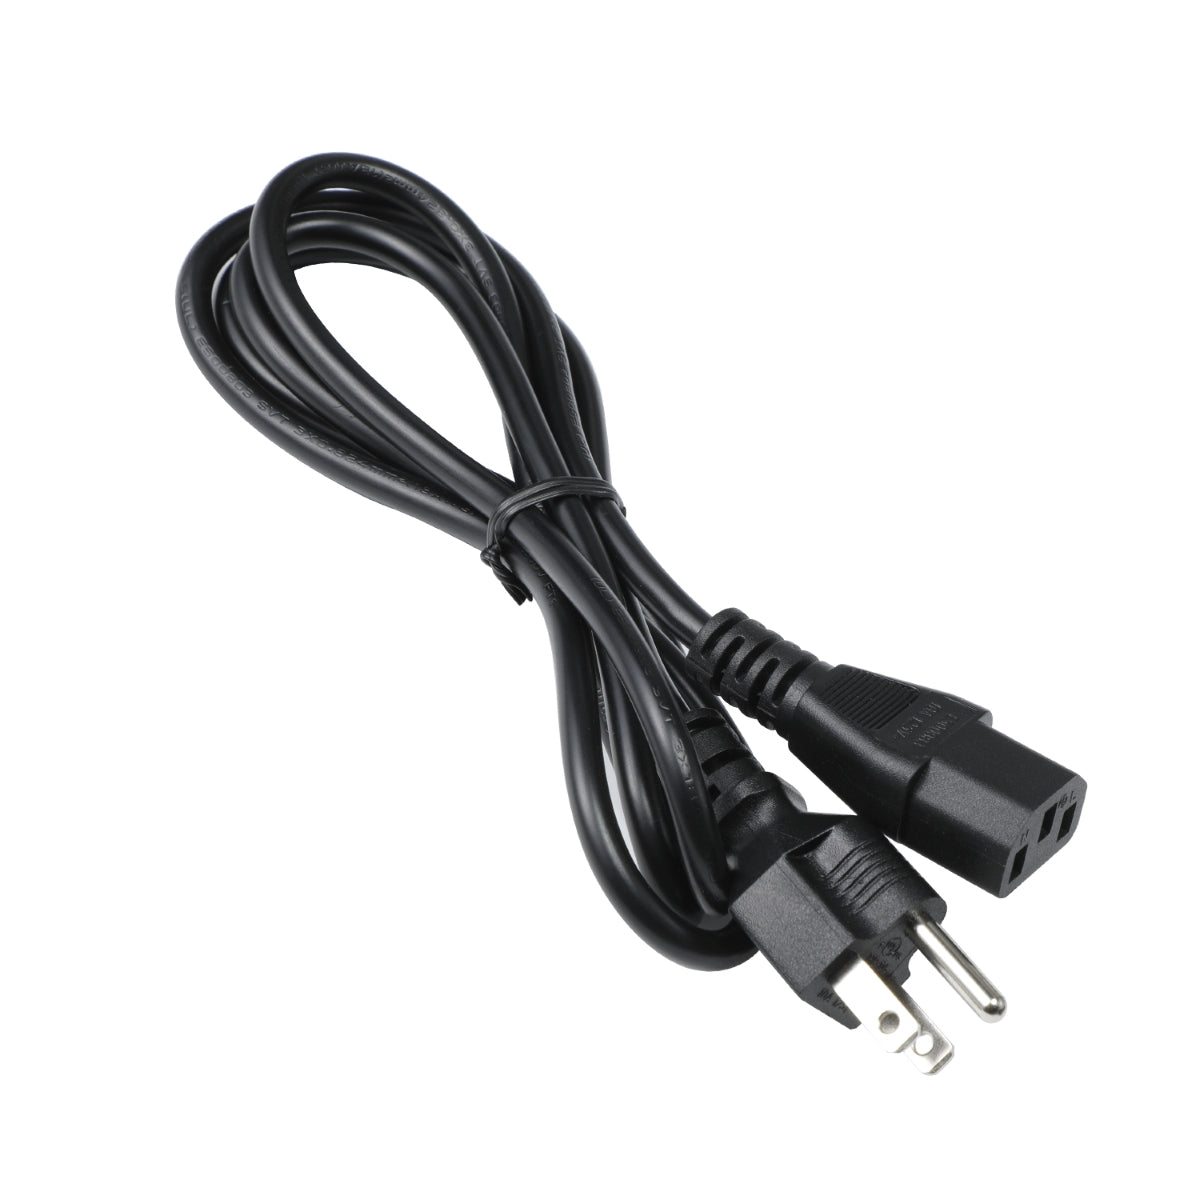 Power Cable for Philips 203V5LSB2 Monitor.